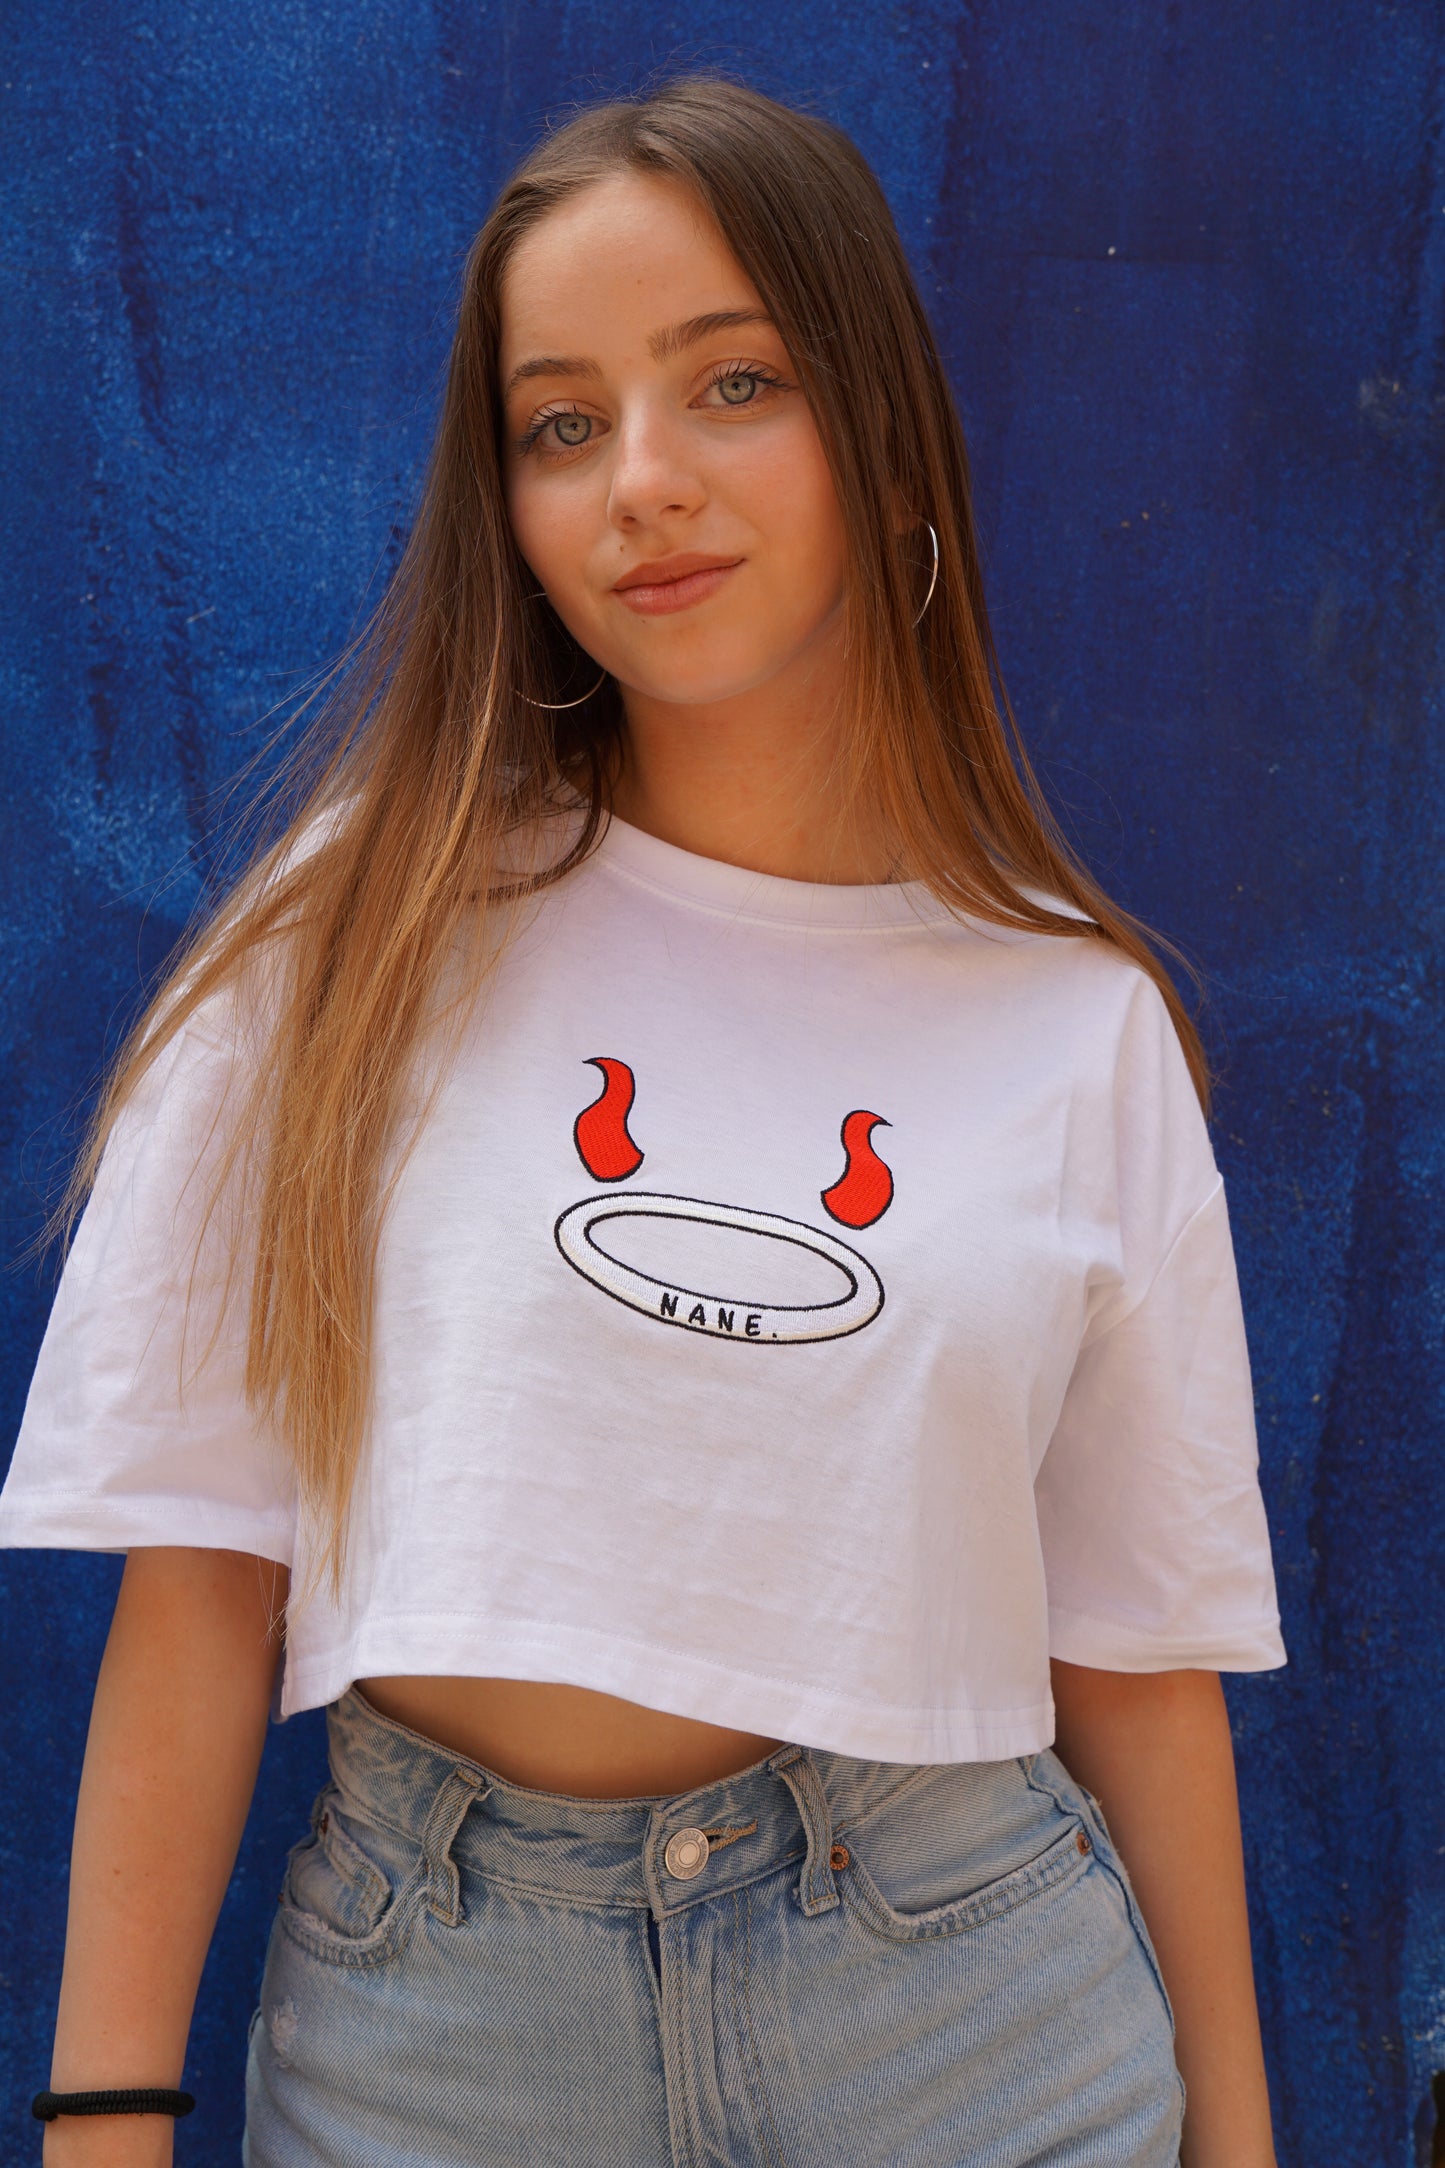 NANE “Heaven or Hell” Embroidered Crop-Top White